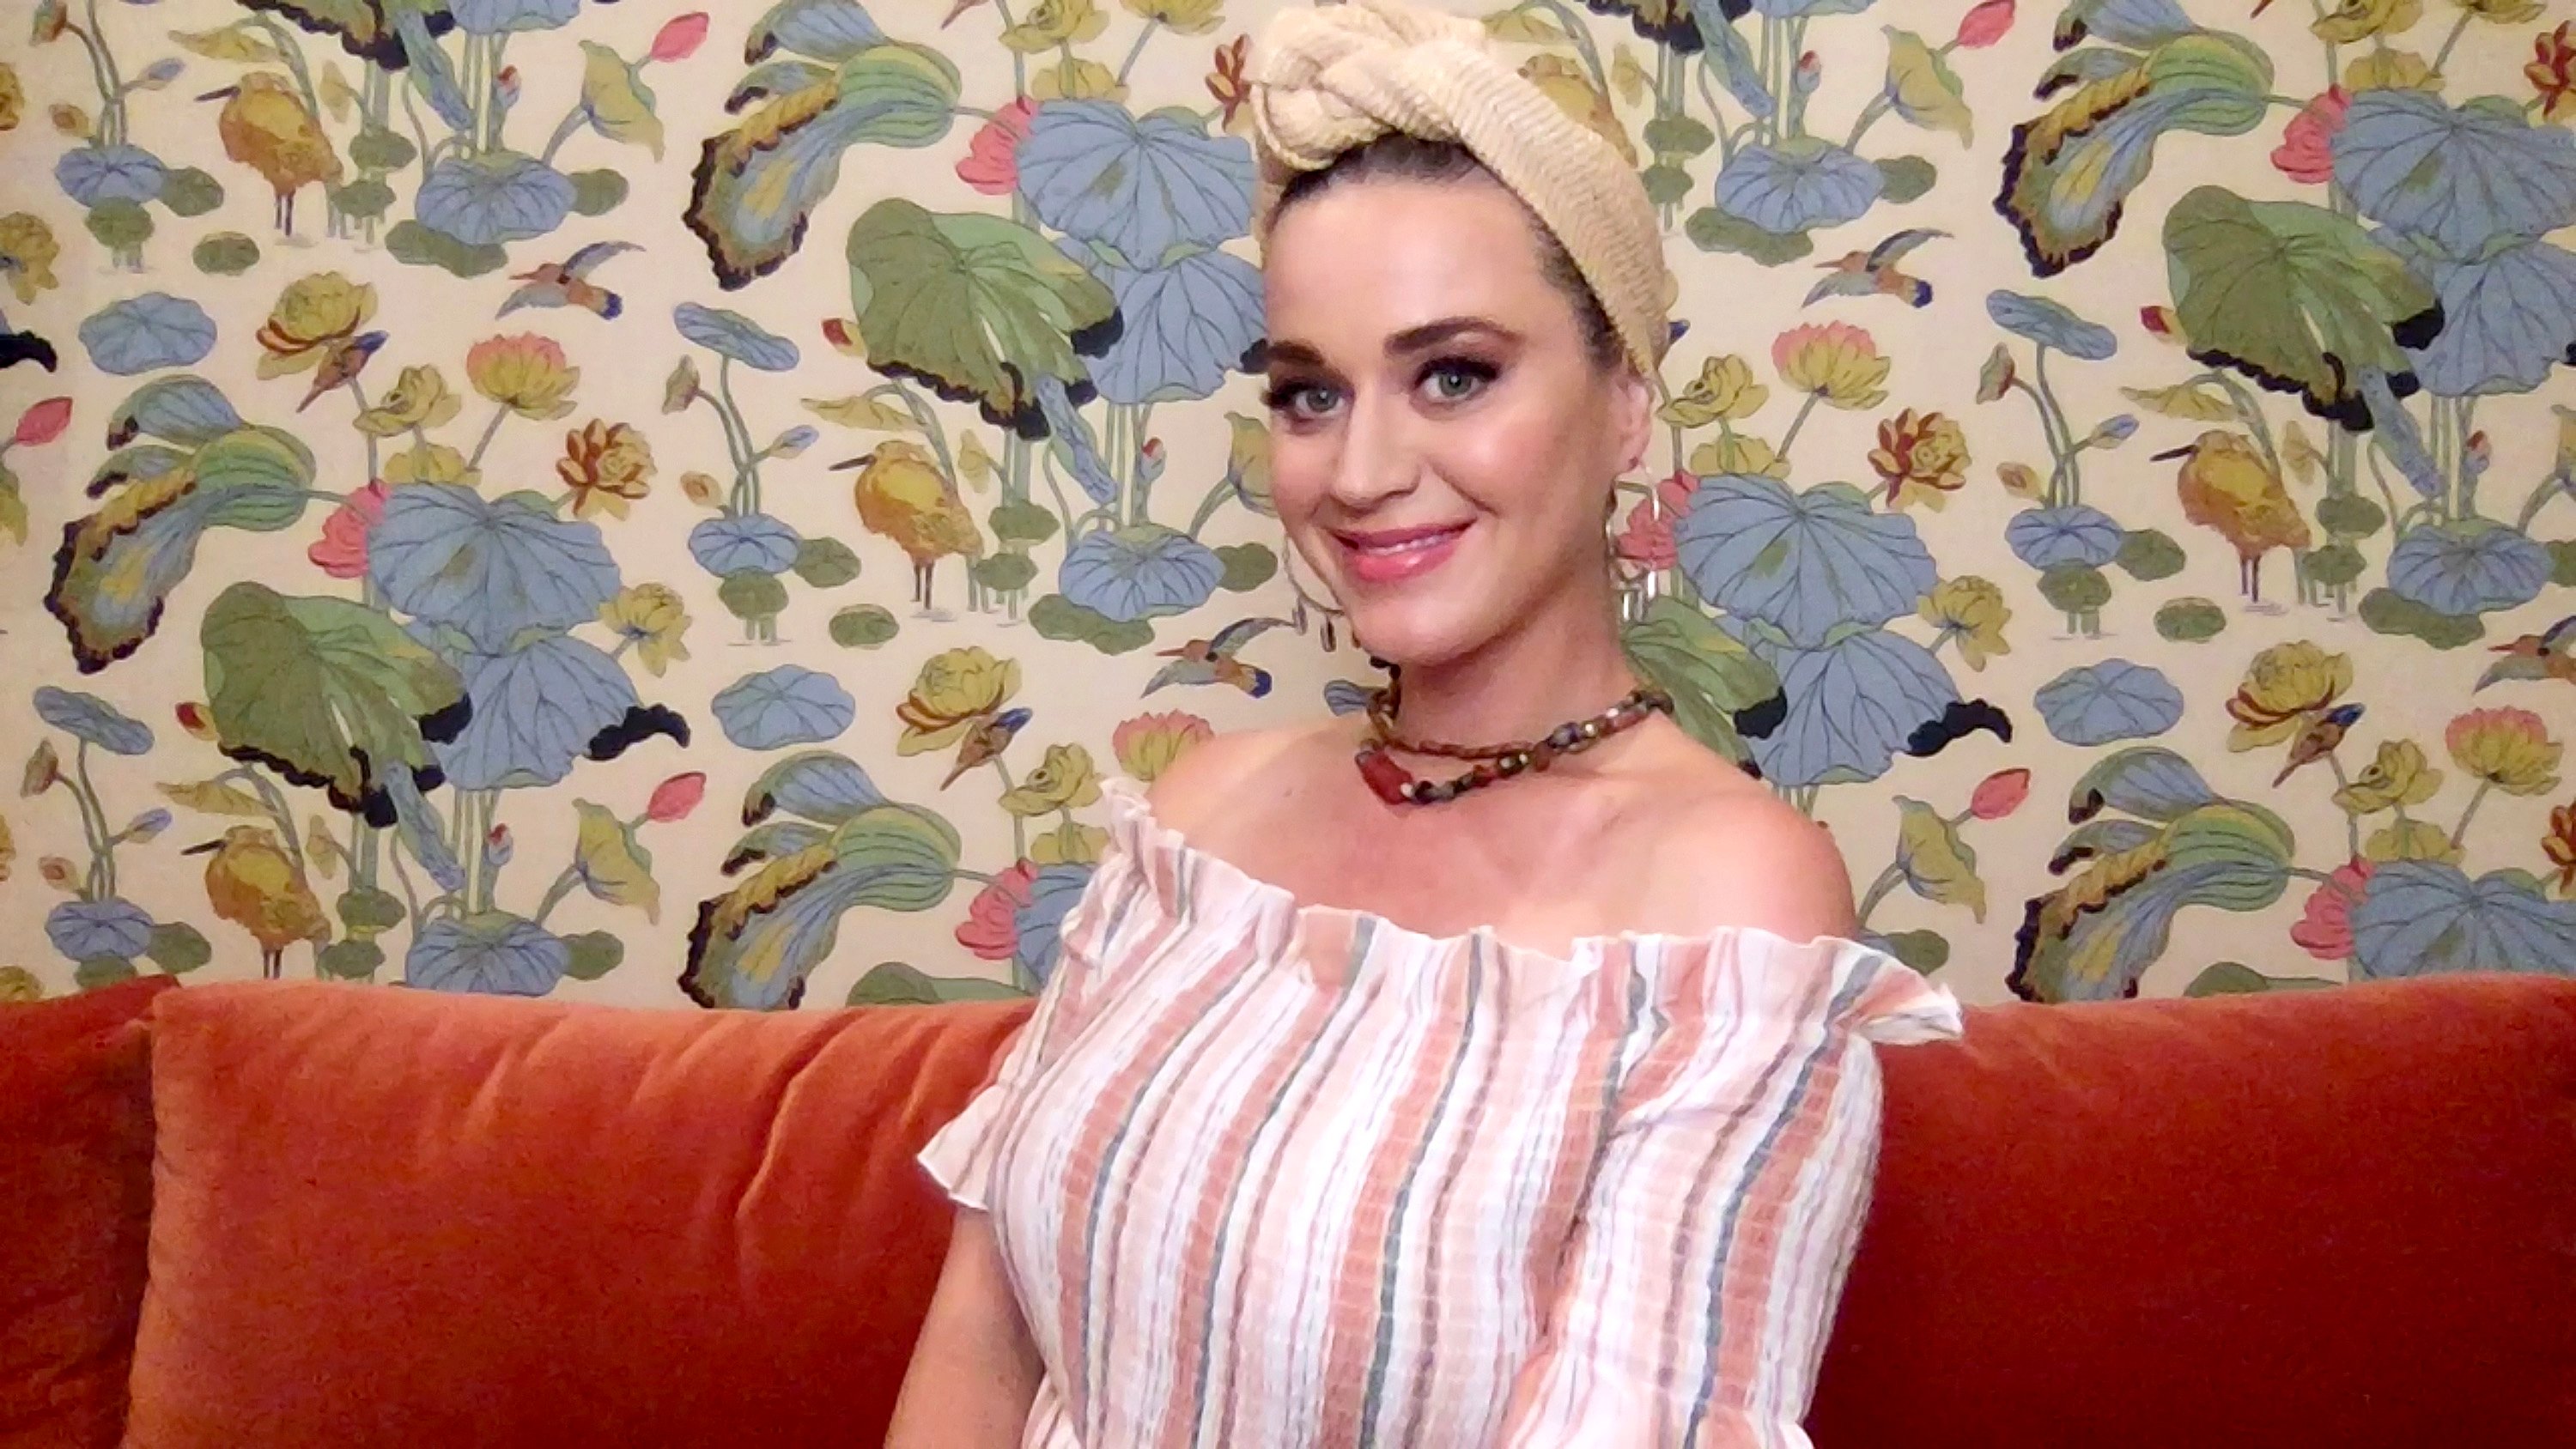 Katy Perry with her hair up, in front of a floral background